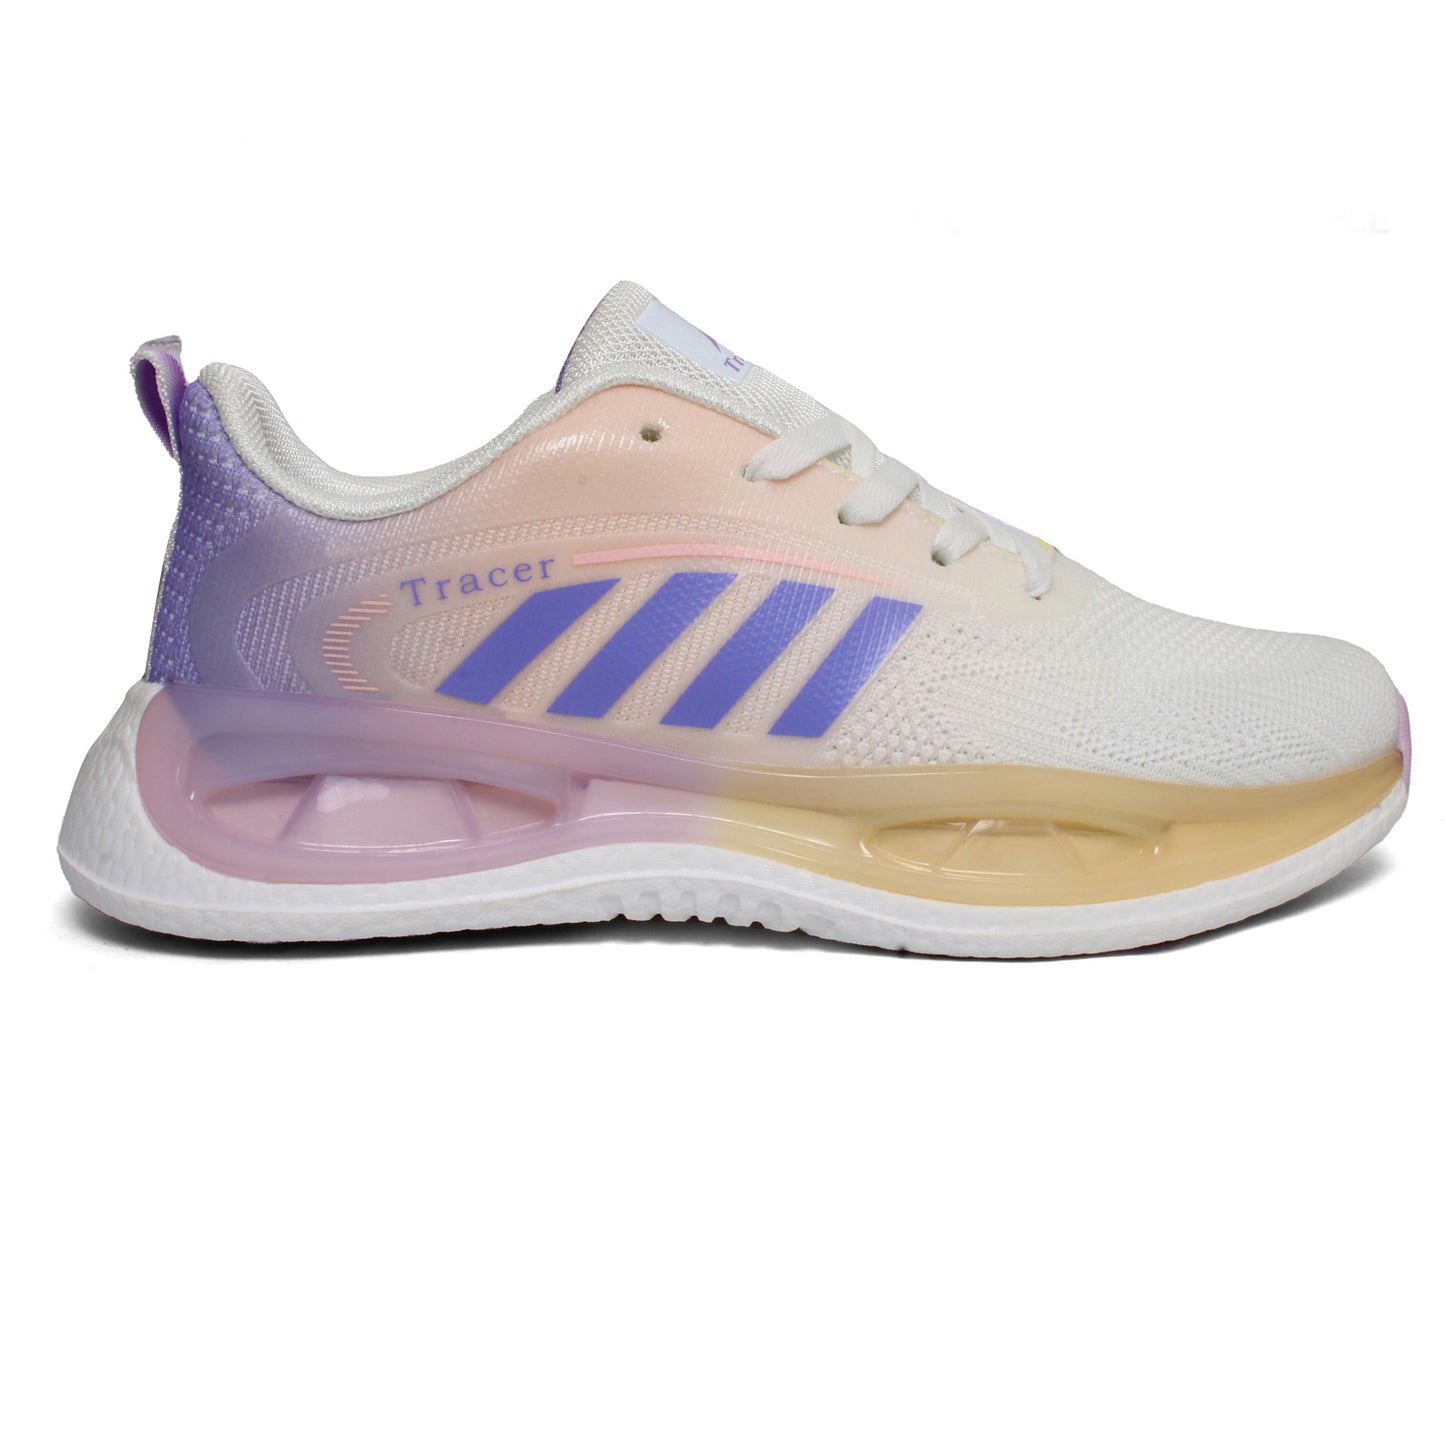 Tracer obsession-l-2502  Women's Sneakers White Purple